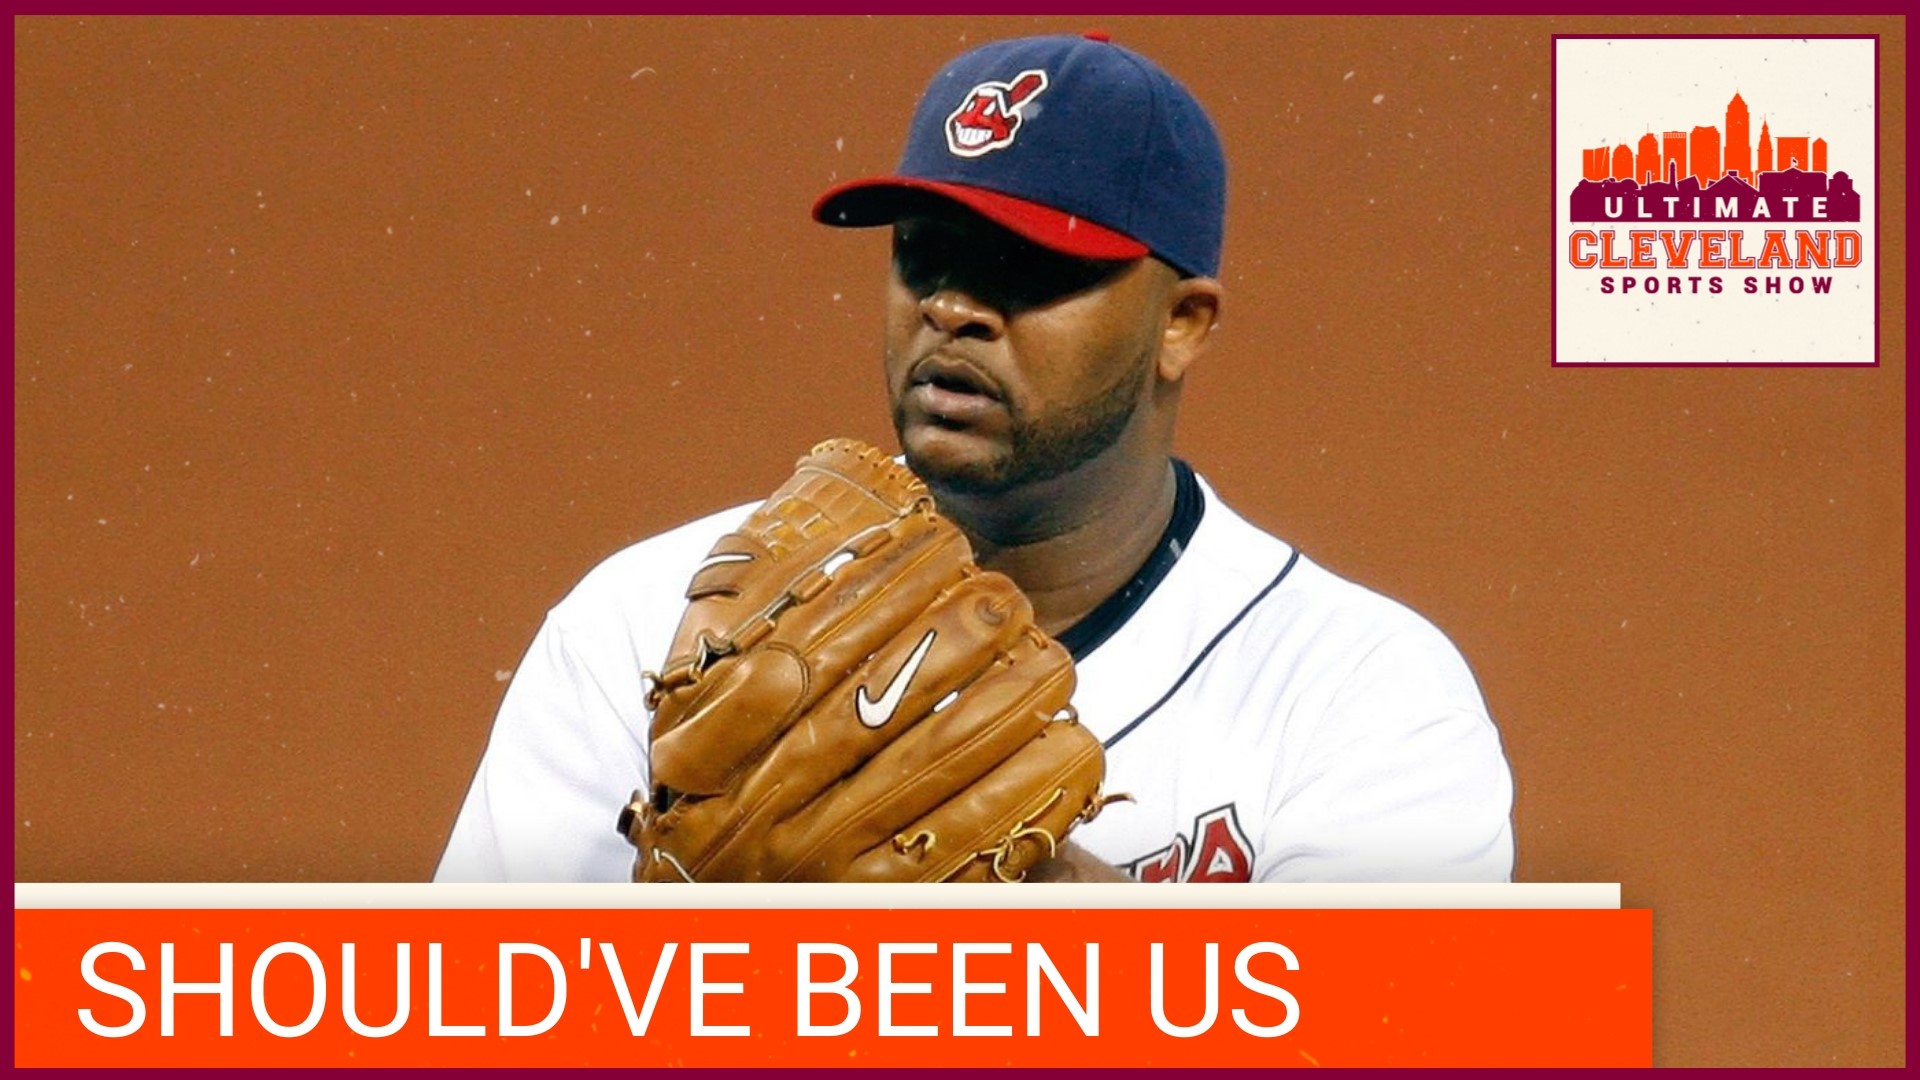 The Cleveland Indians would have won the World Series in 2007 if I pitched better | CC Sabathia